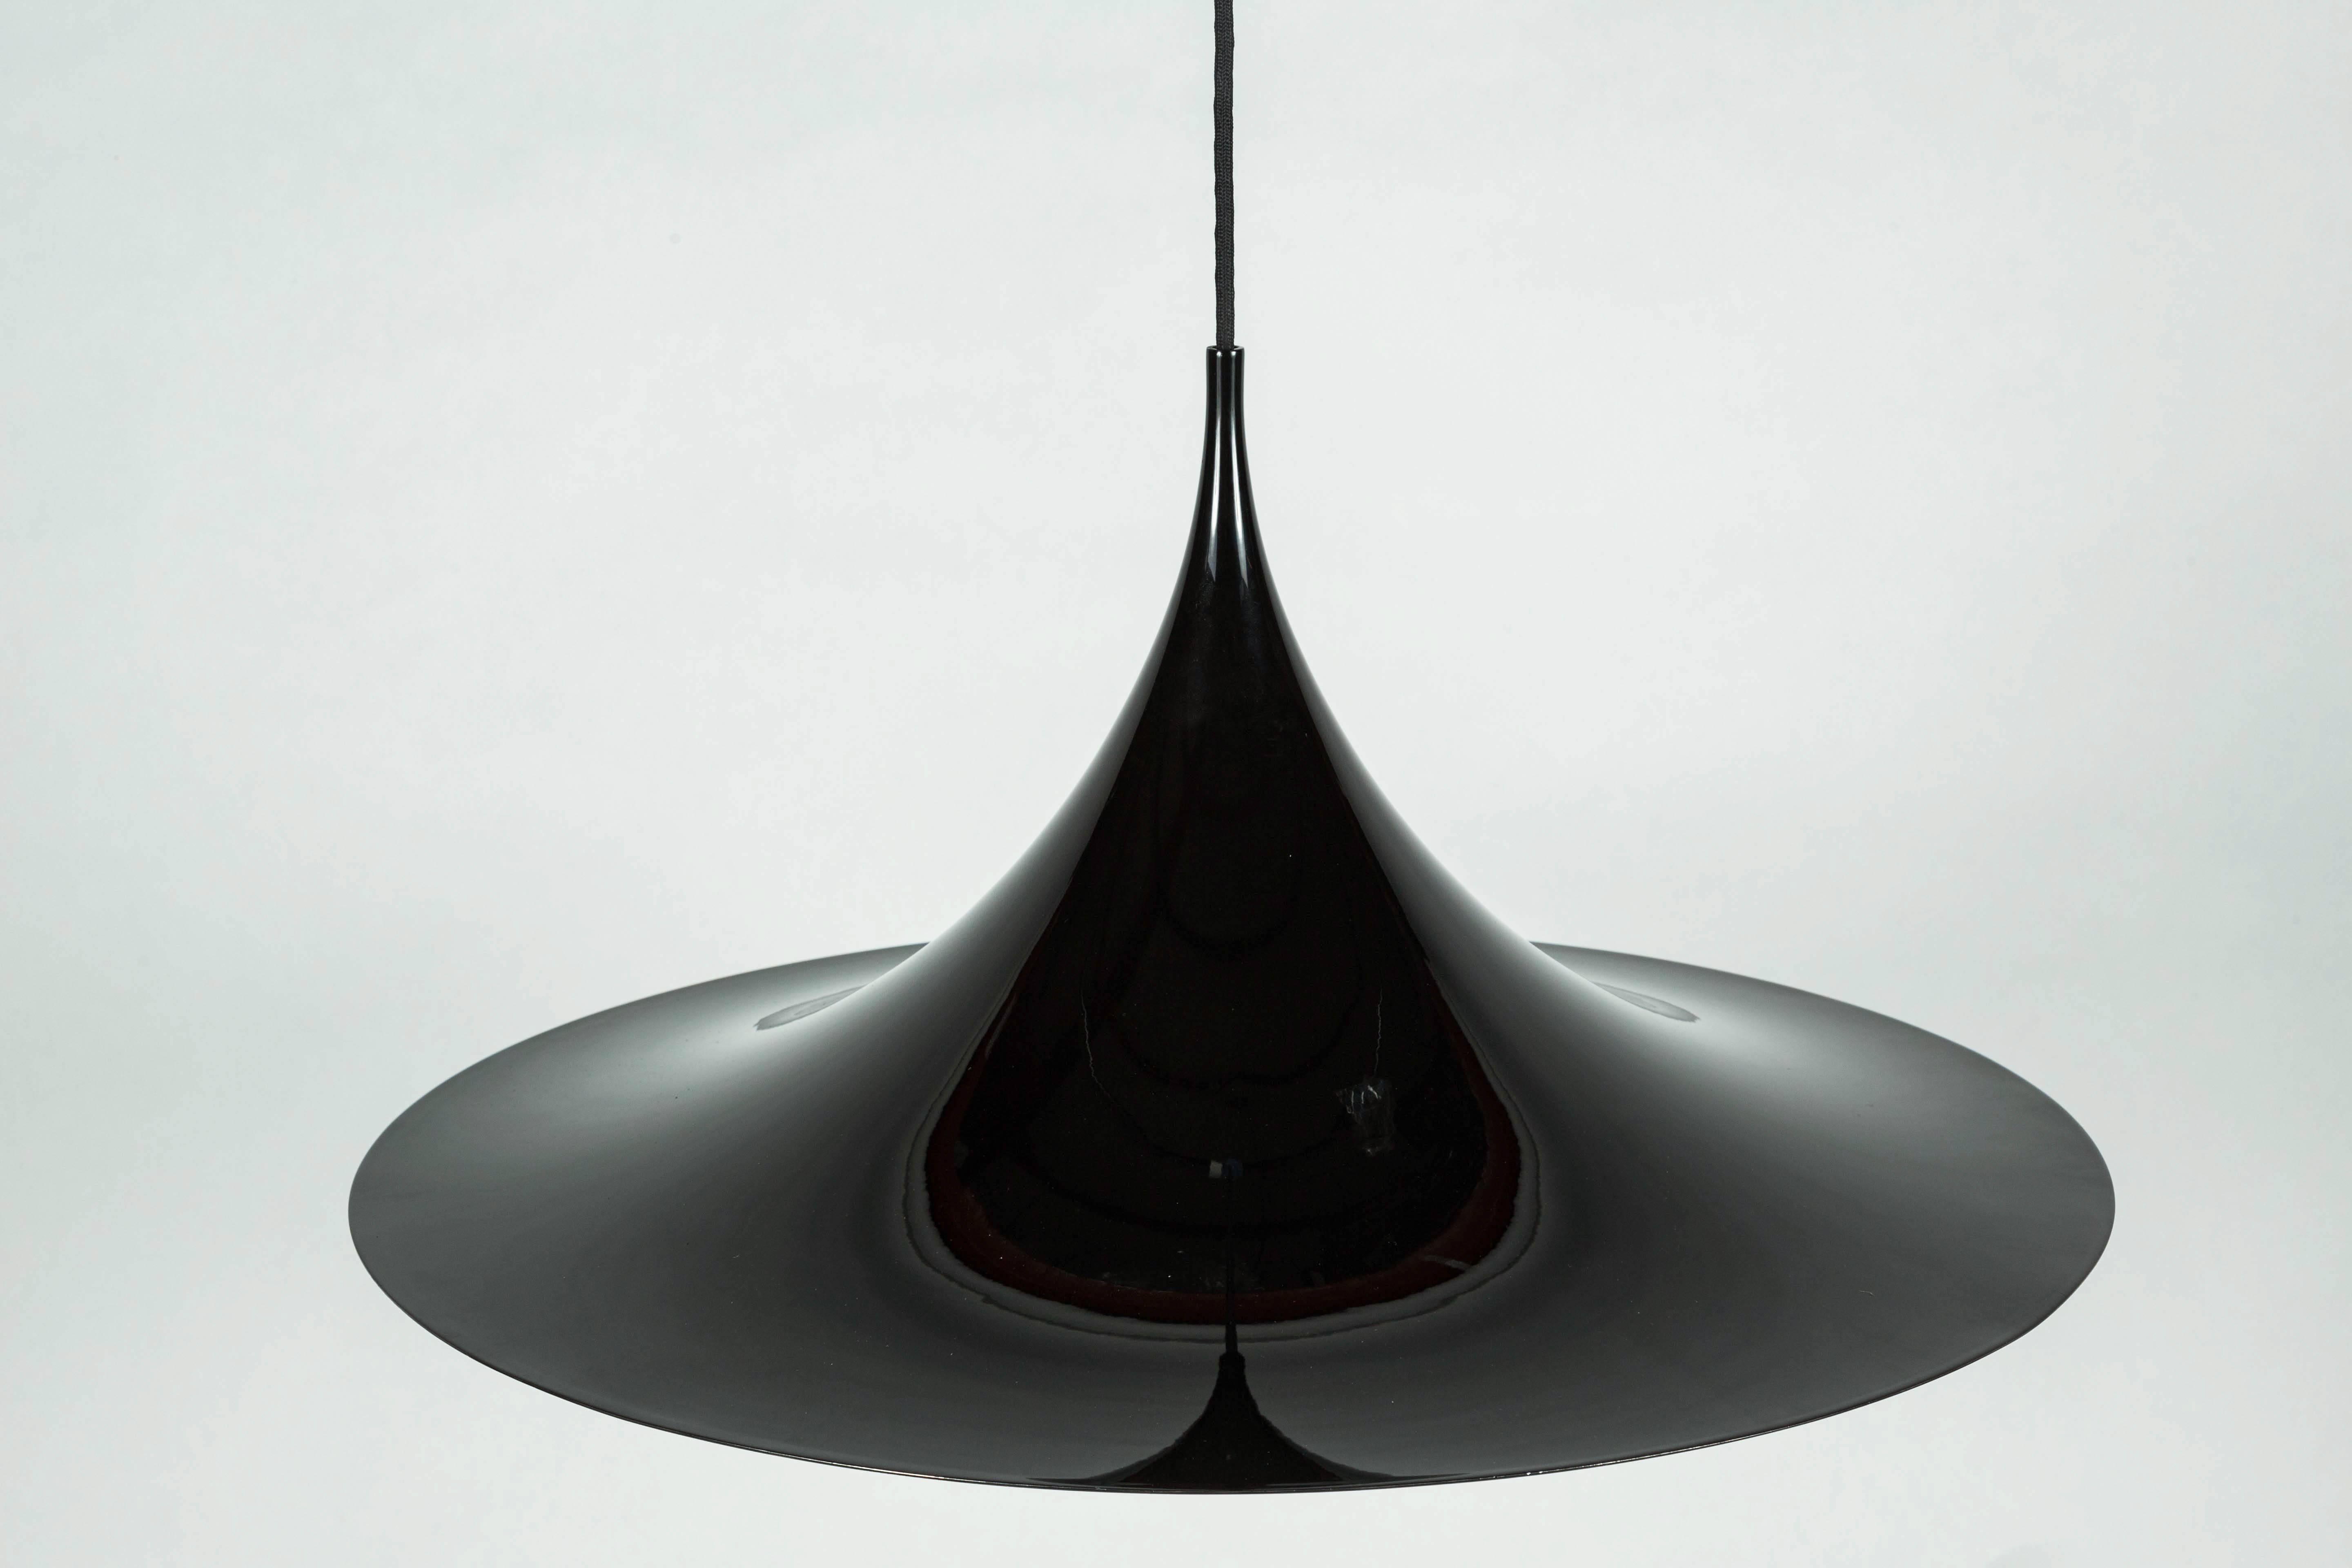 Semi pendal by Claus Bonderup and Thorston Thorp, Denmark, circa 1960.
Black metal with white enamel inner surface. 

Rewired, black cloth cord.

Produced by Fog.